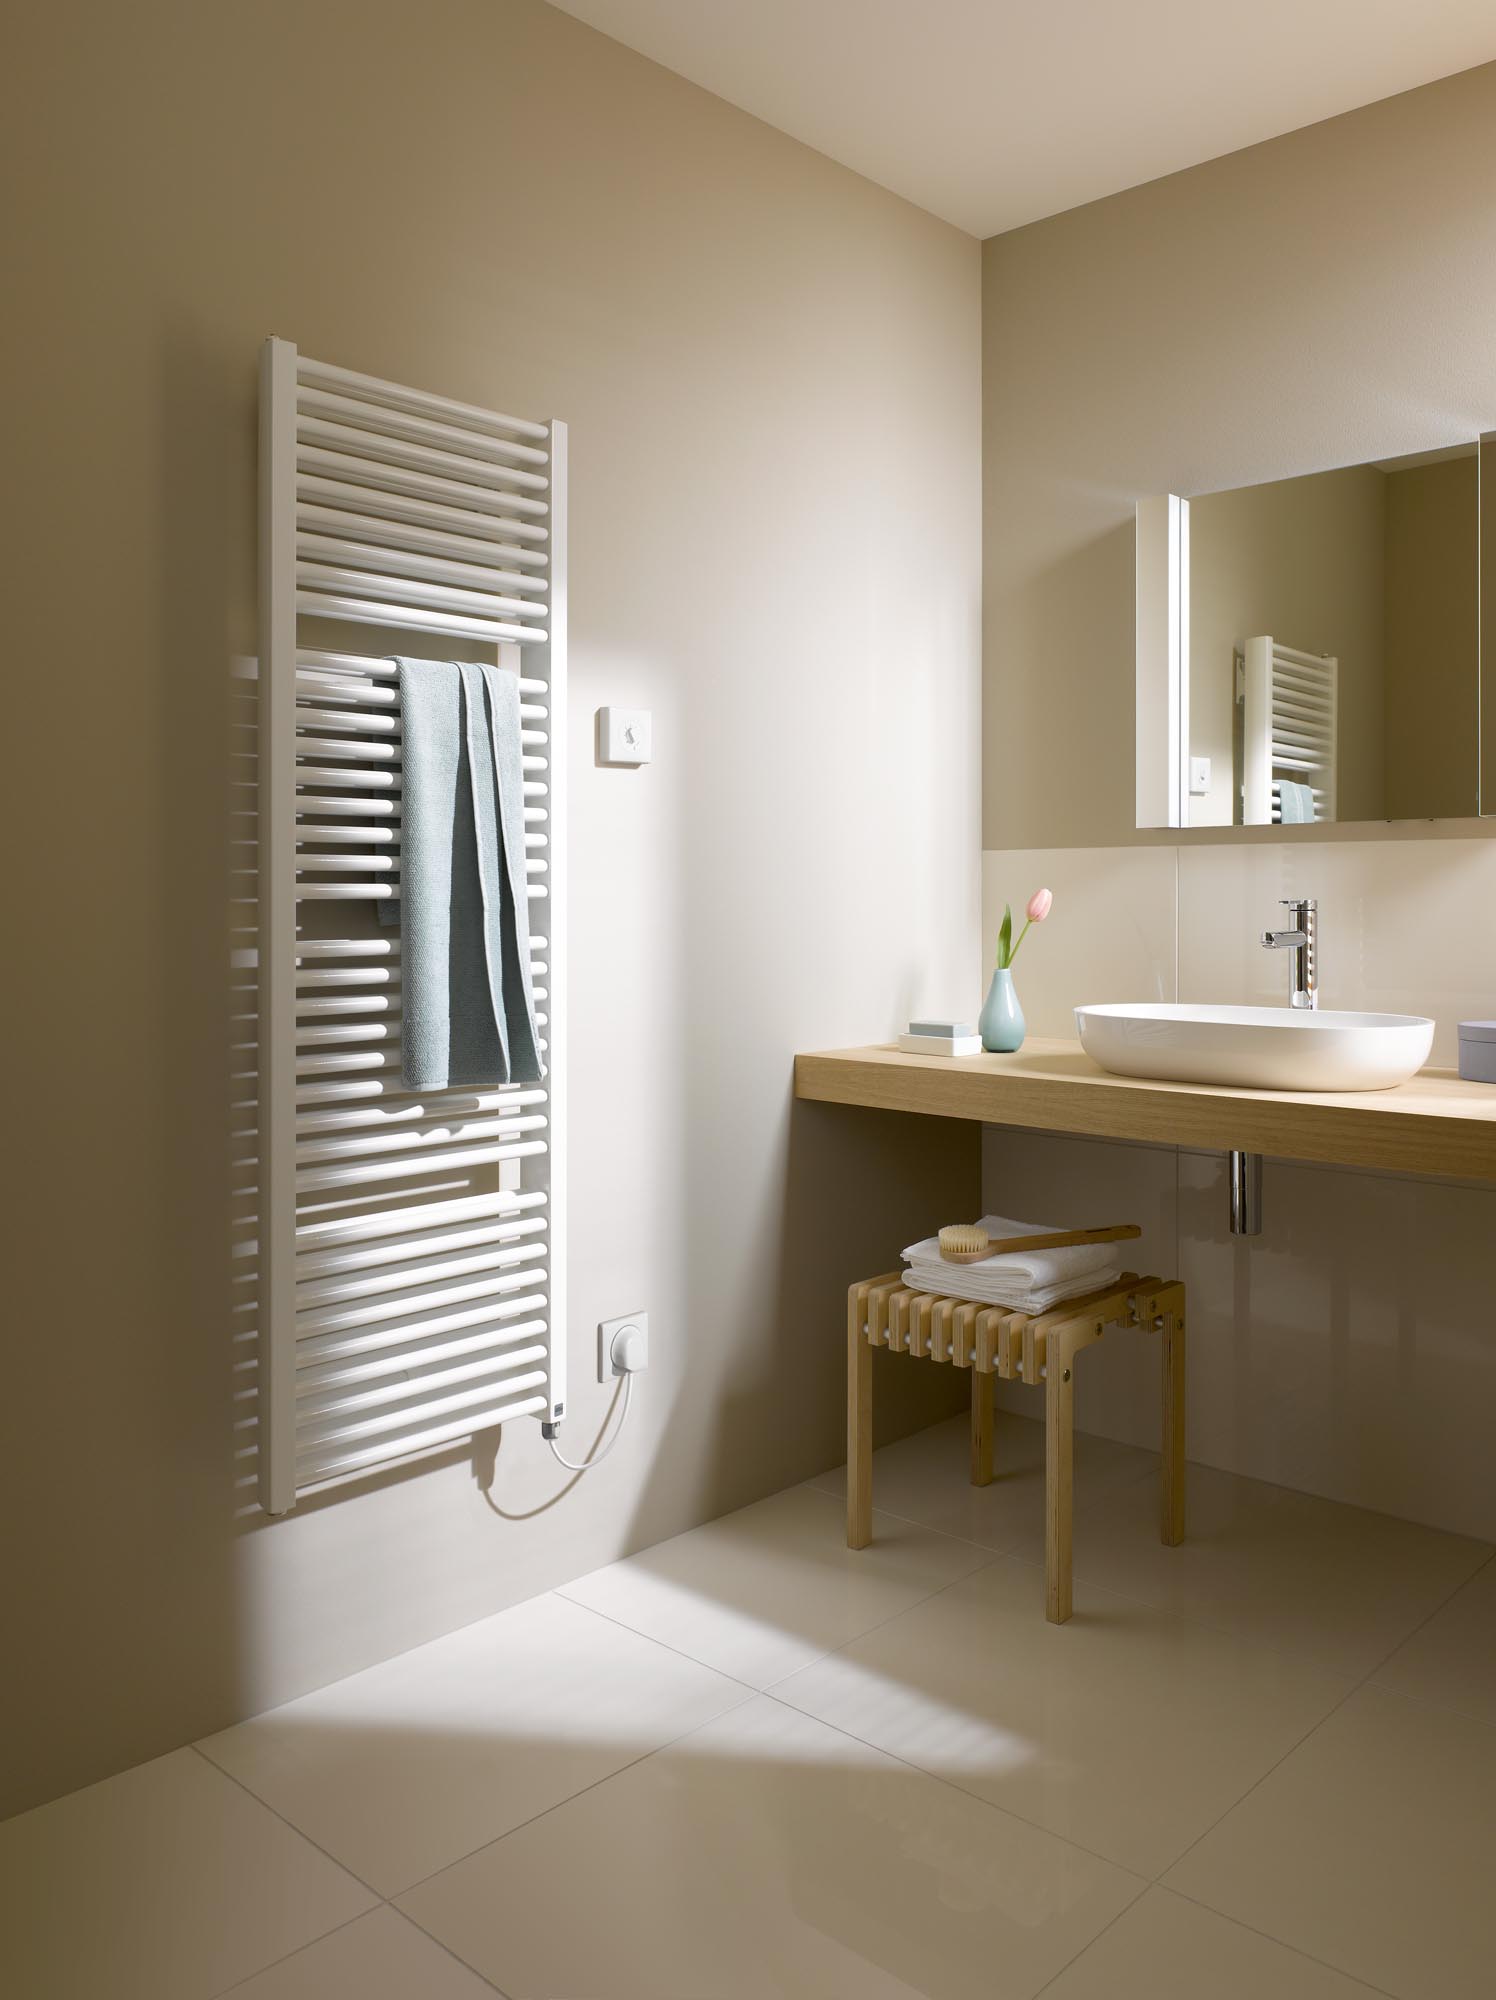 The Kermi Duett design and bathroom radiator is also available in an electric version.